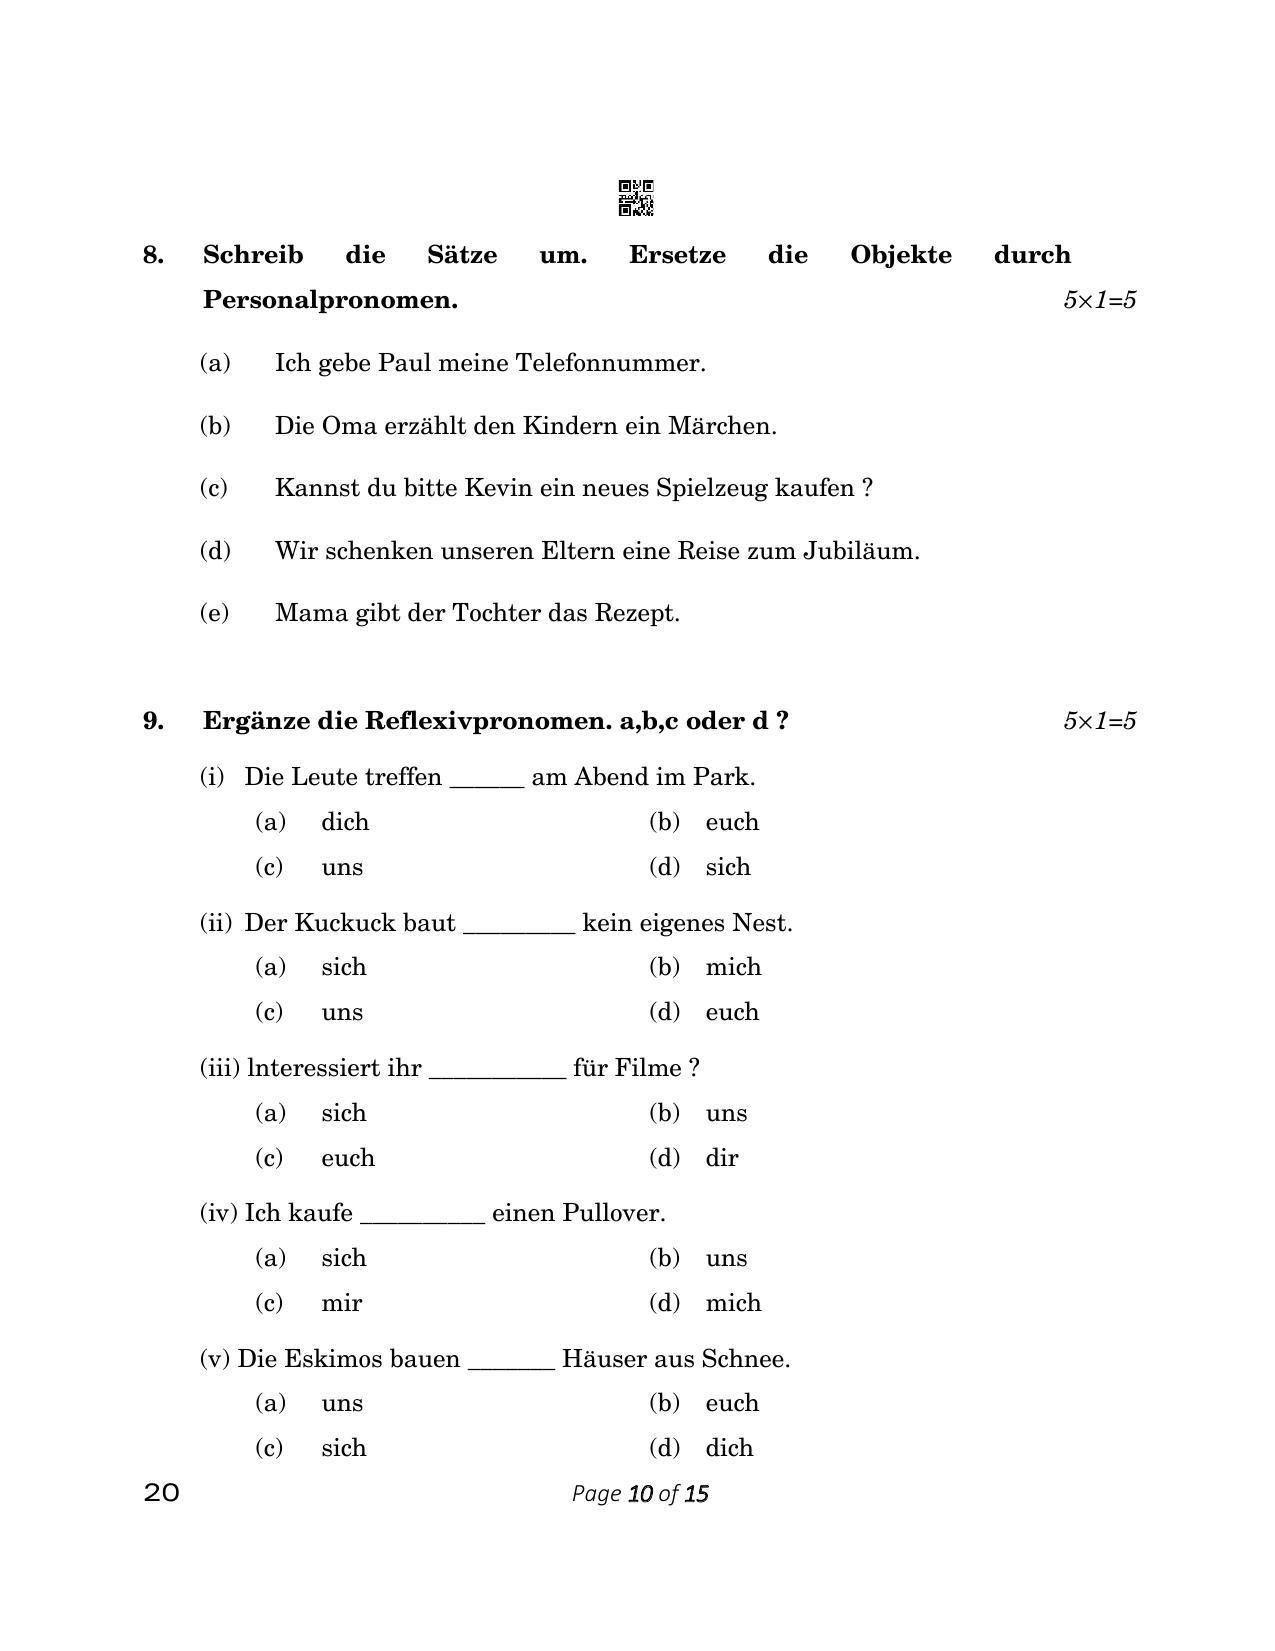 CBSE Class 12 20_German 2023 Question Paper - Page 10